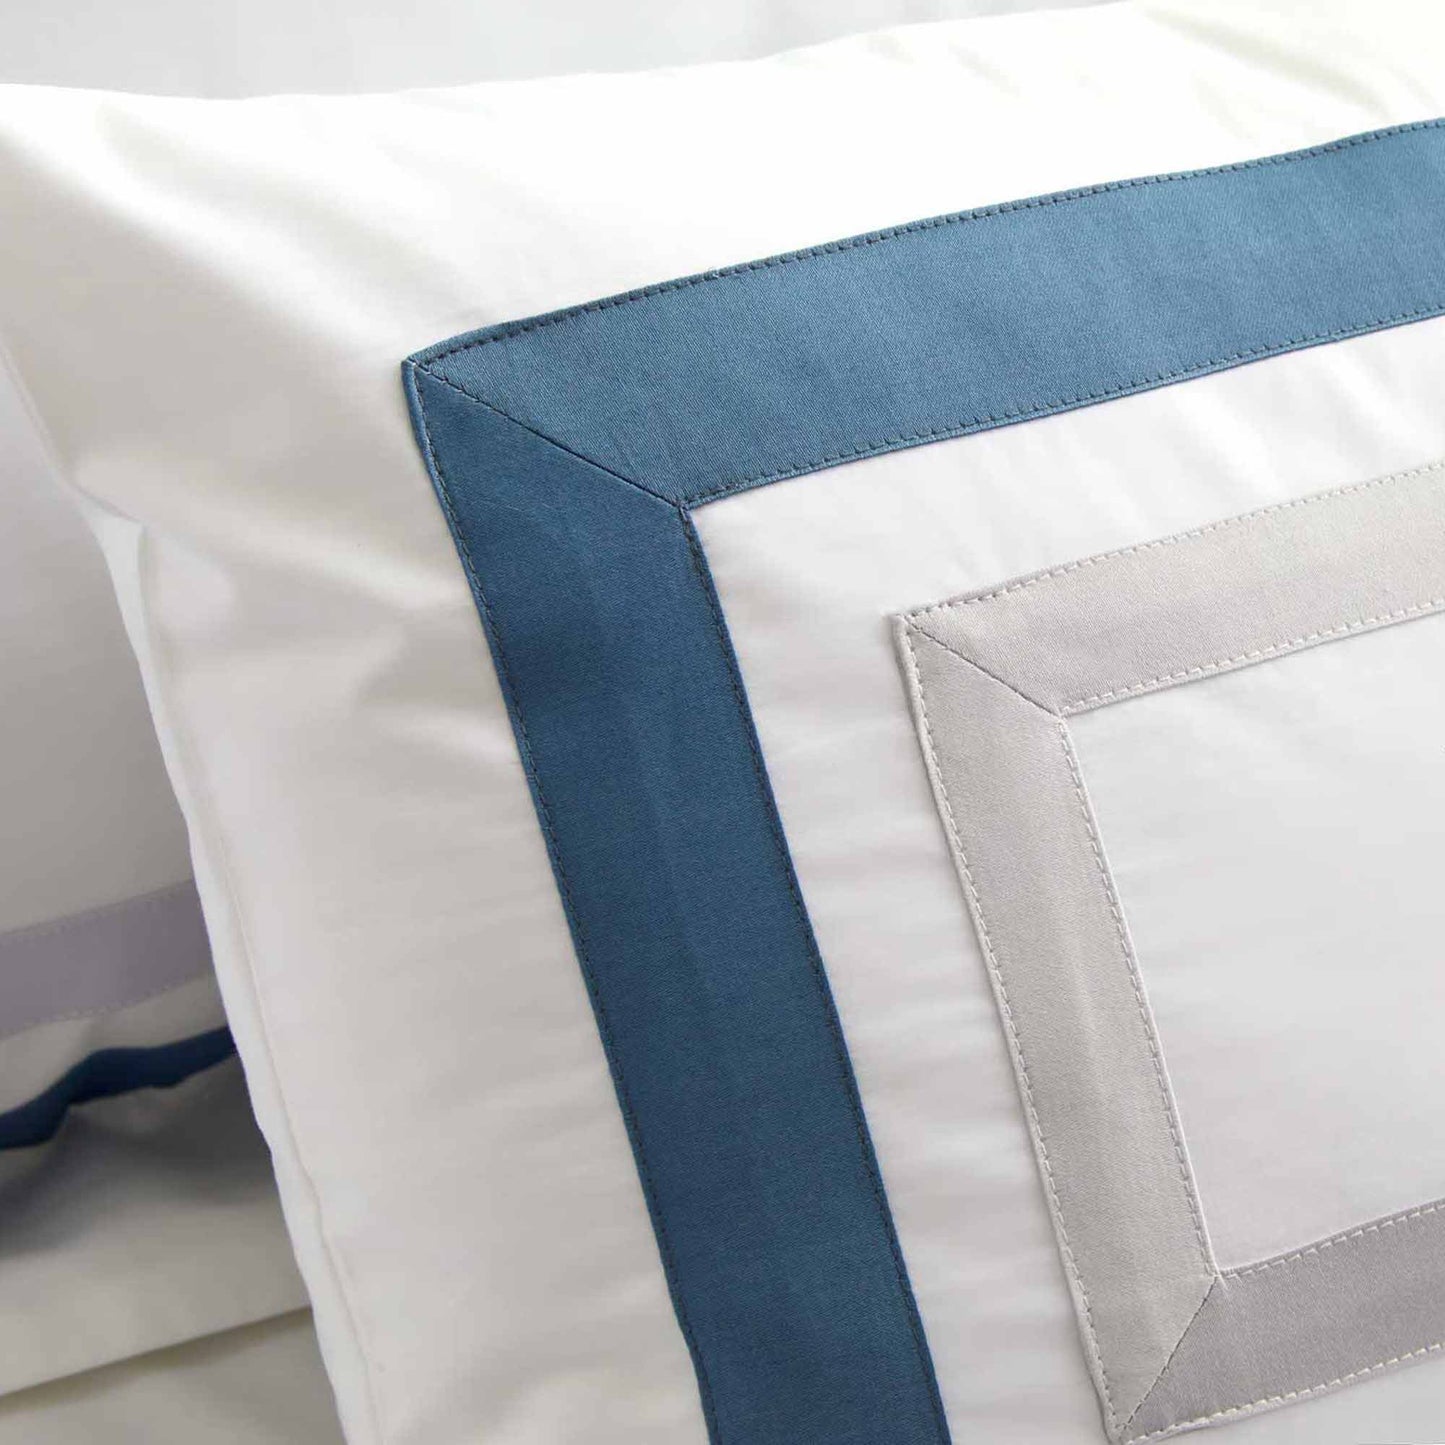 Duvet cover set in 400TC cotton percale with contrasting satin applications - Pure